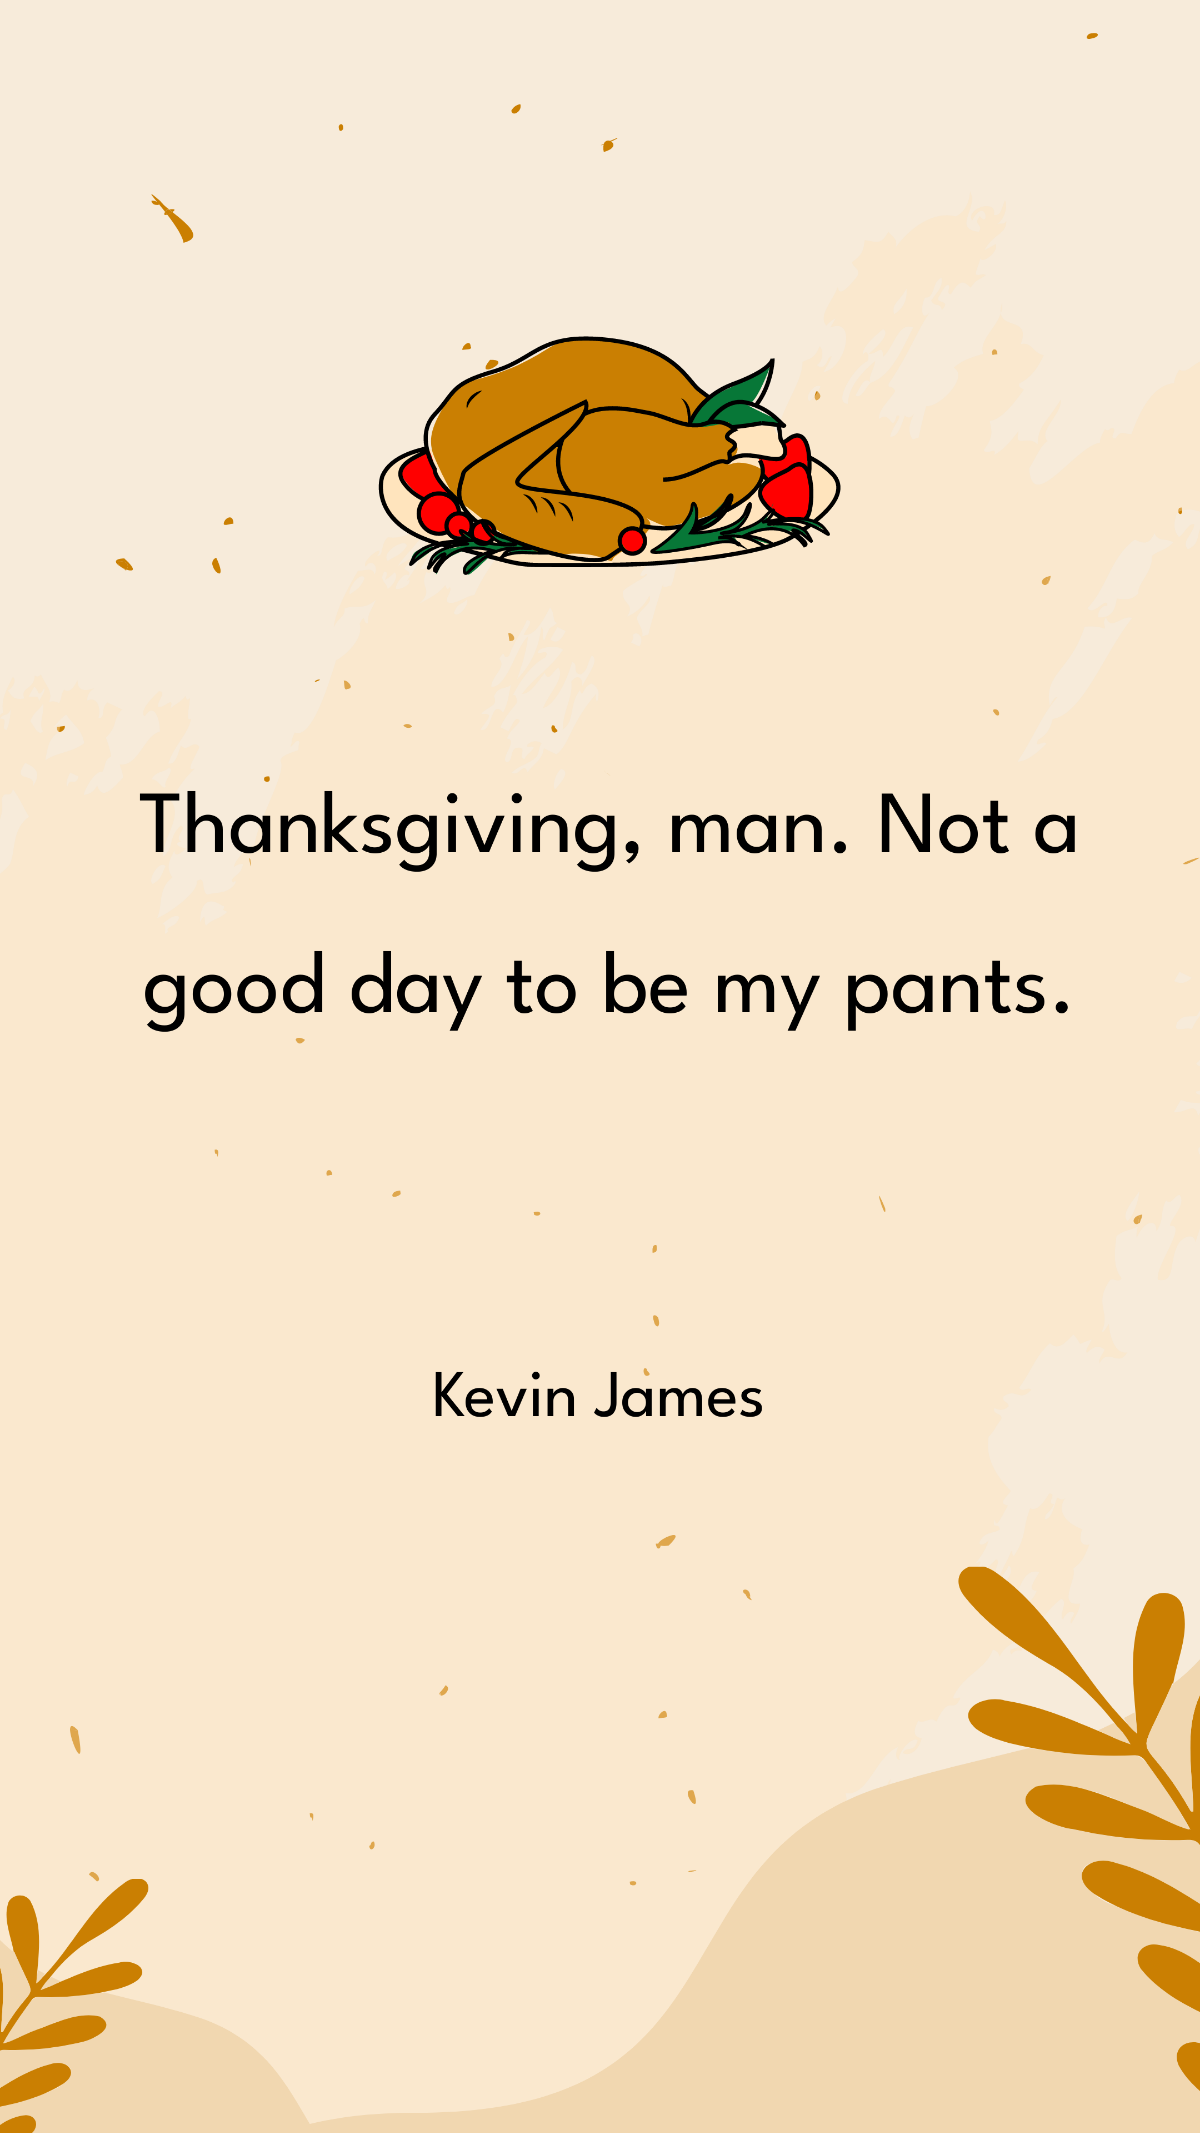 Kevin James - Thanksgiving, man. Not a good day to be my pants. Template